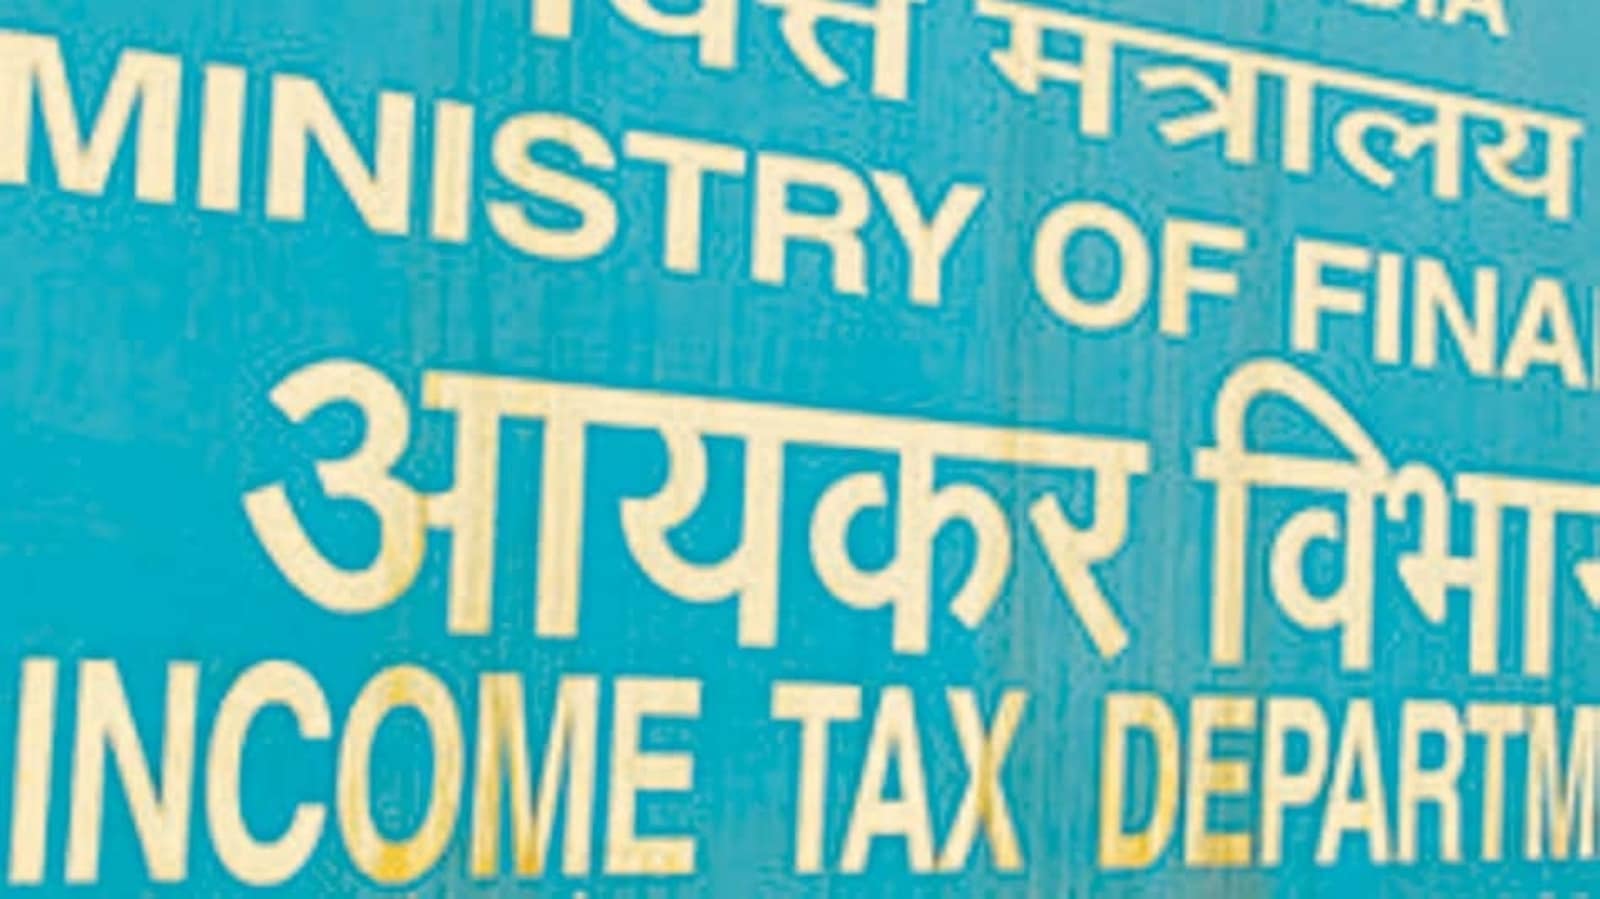 Income Tax evasion rectified - Tfipost.com